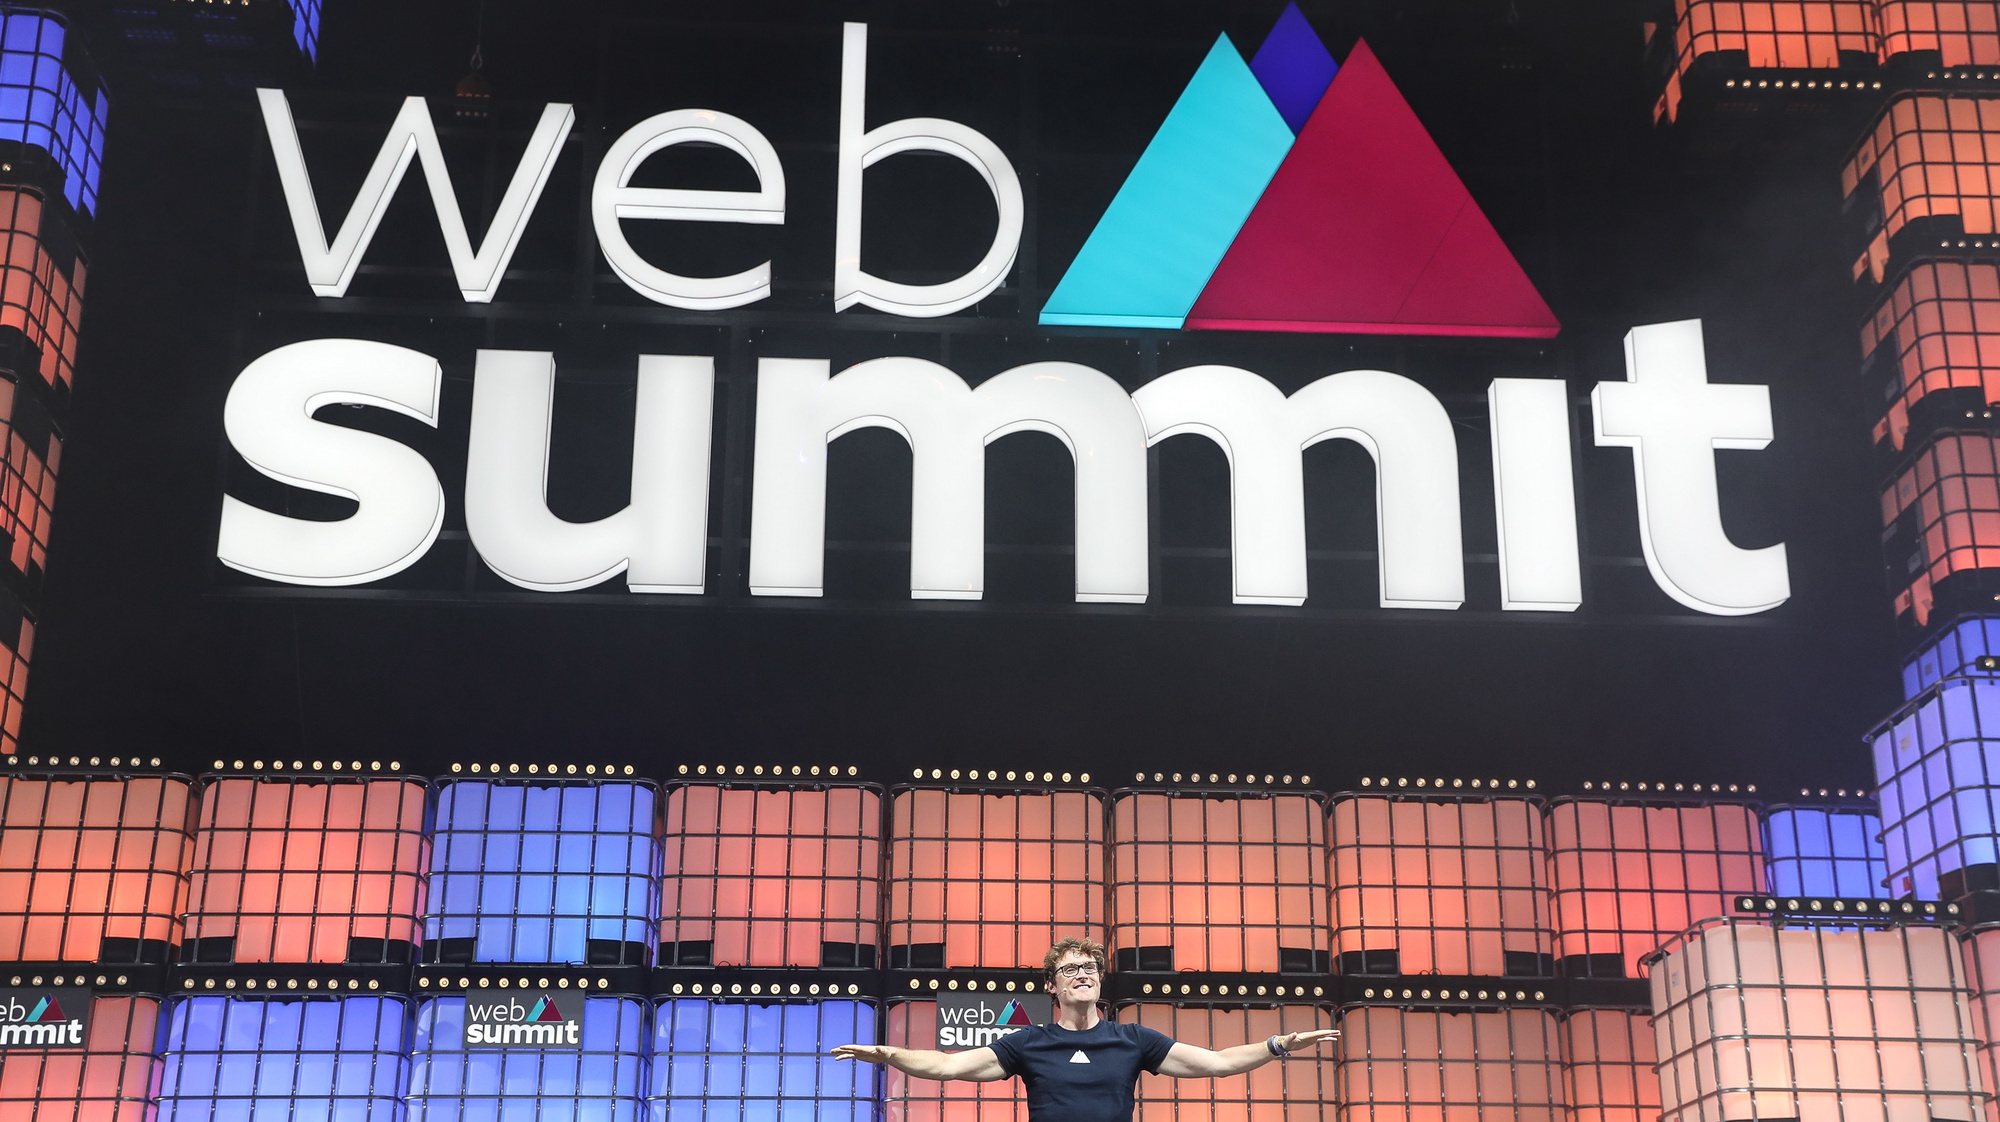 epa09558150 CEO and co-founder of Web Summit, Paddy Cosgrave, speaks during the first day of the 2021 Web Summit in Lisbon, Portugal, 01 November 2021. More than 40,000 people participate in the 2021 Web Summit, considered the largest event of startups and technological entrepreneurship in the world, that takes place from 01 to 04 November.  EPA/ANTONIO COTRIM